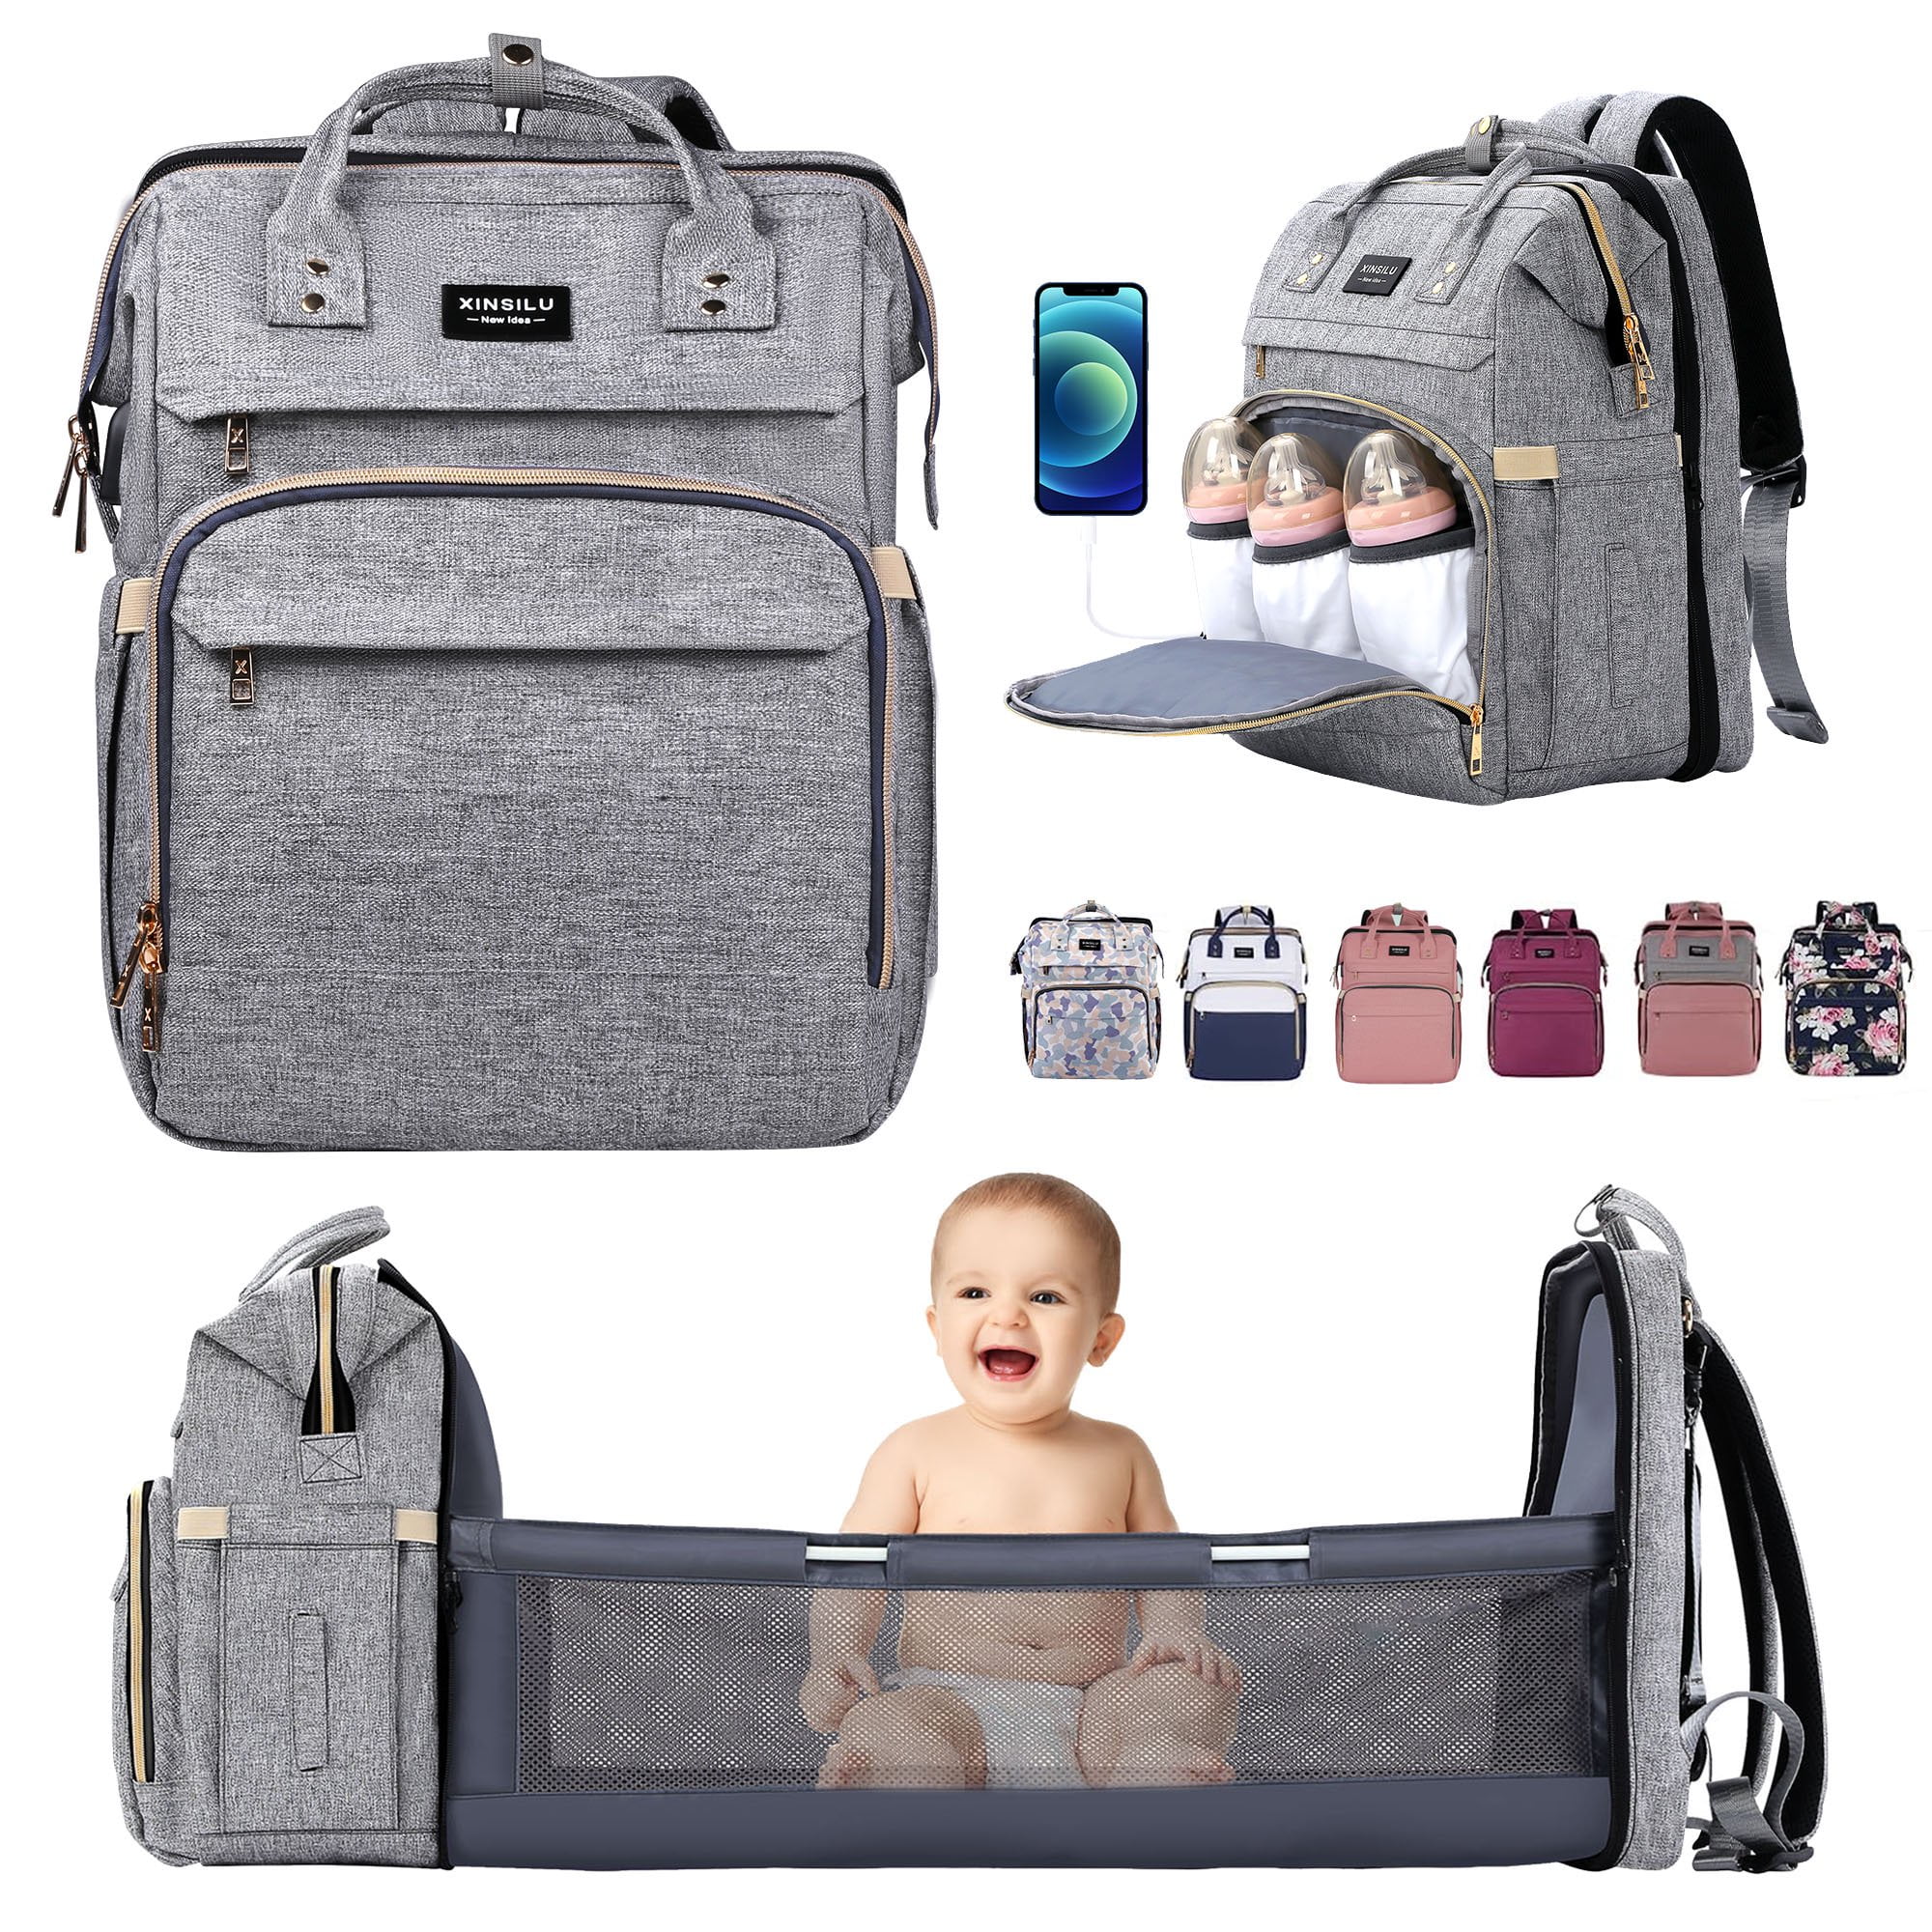 SoarDream Diaper Bag with Changing Table-Travel Backpack, Storage ...